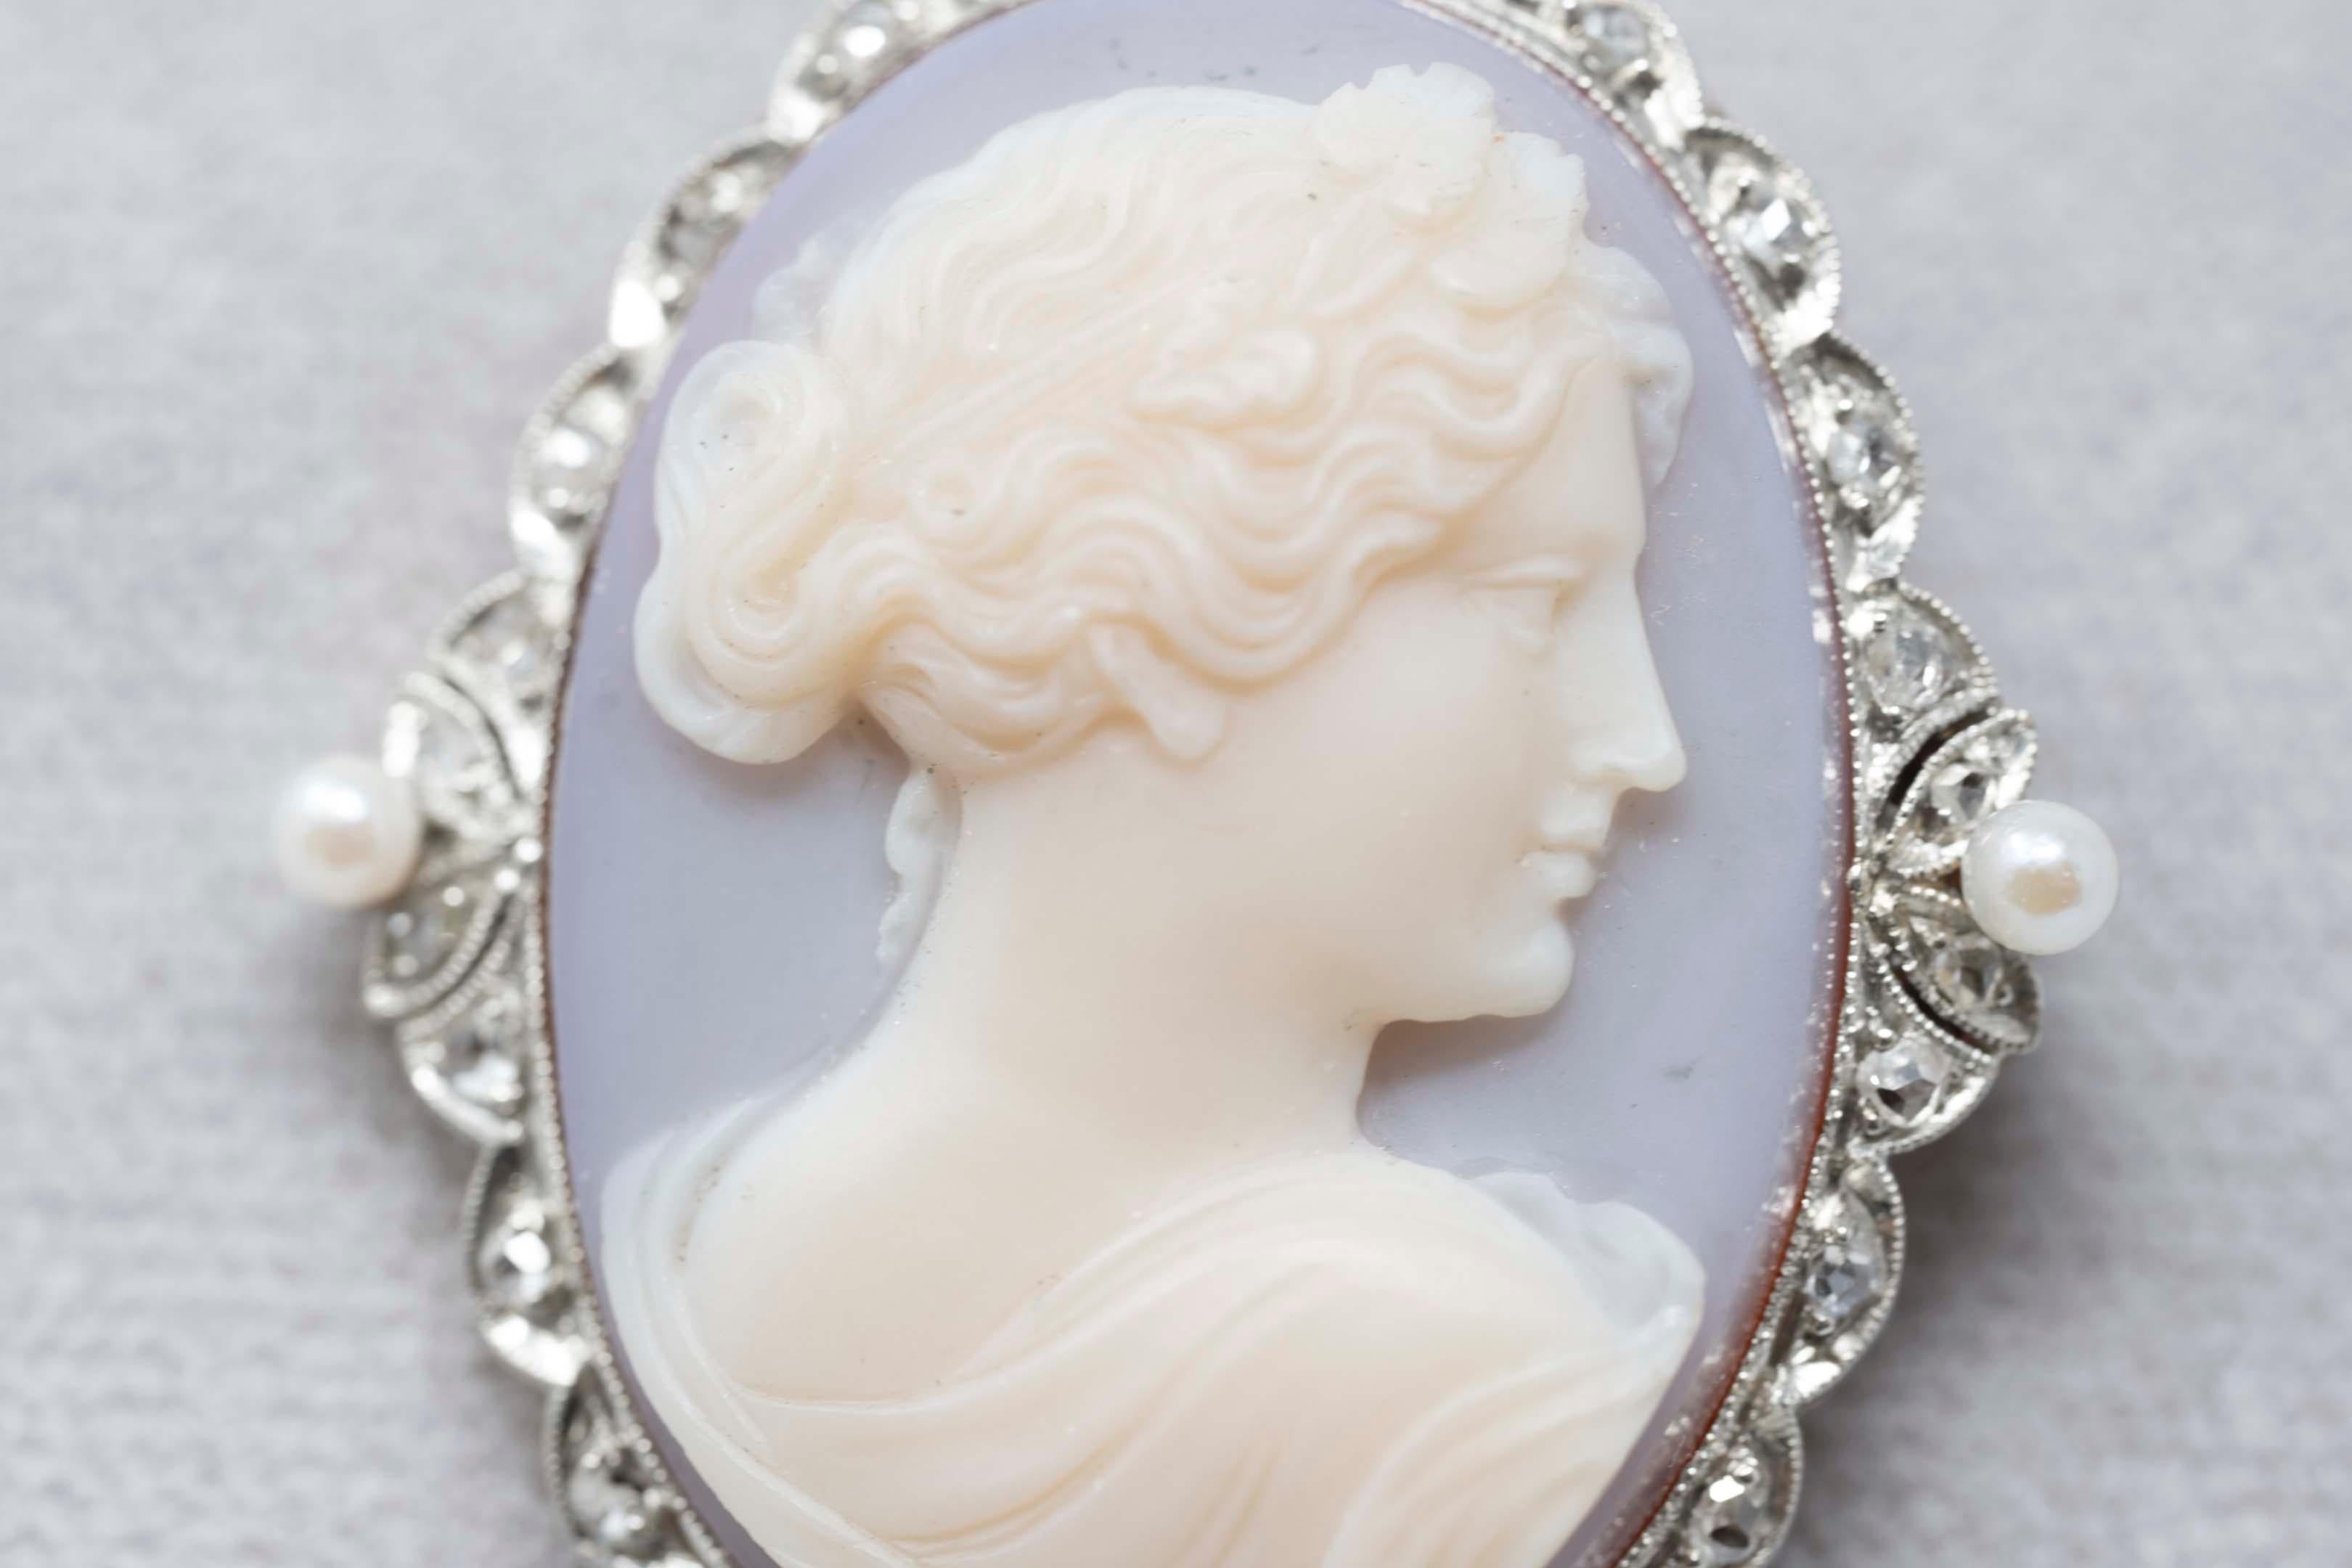 Superb Victorian Cameo Beauty and 18k gold & blue agate cameo brooch/pin. Set with old mine cut diamonds and 4 small pearls, circa 1880. 4cm x 3.2cm, unmarked, acid tested 18k. Weight 12 grams. Good condition.
